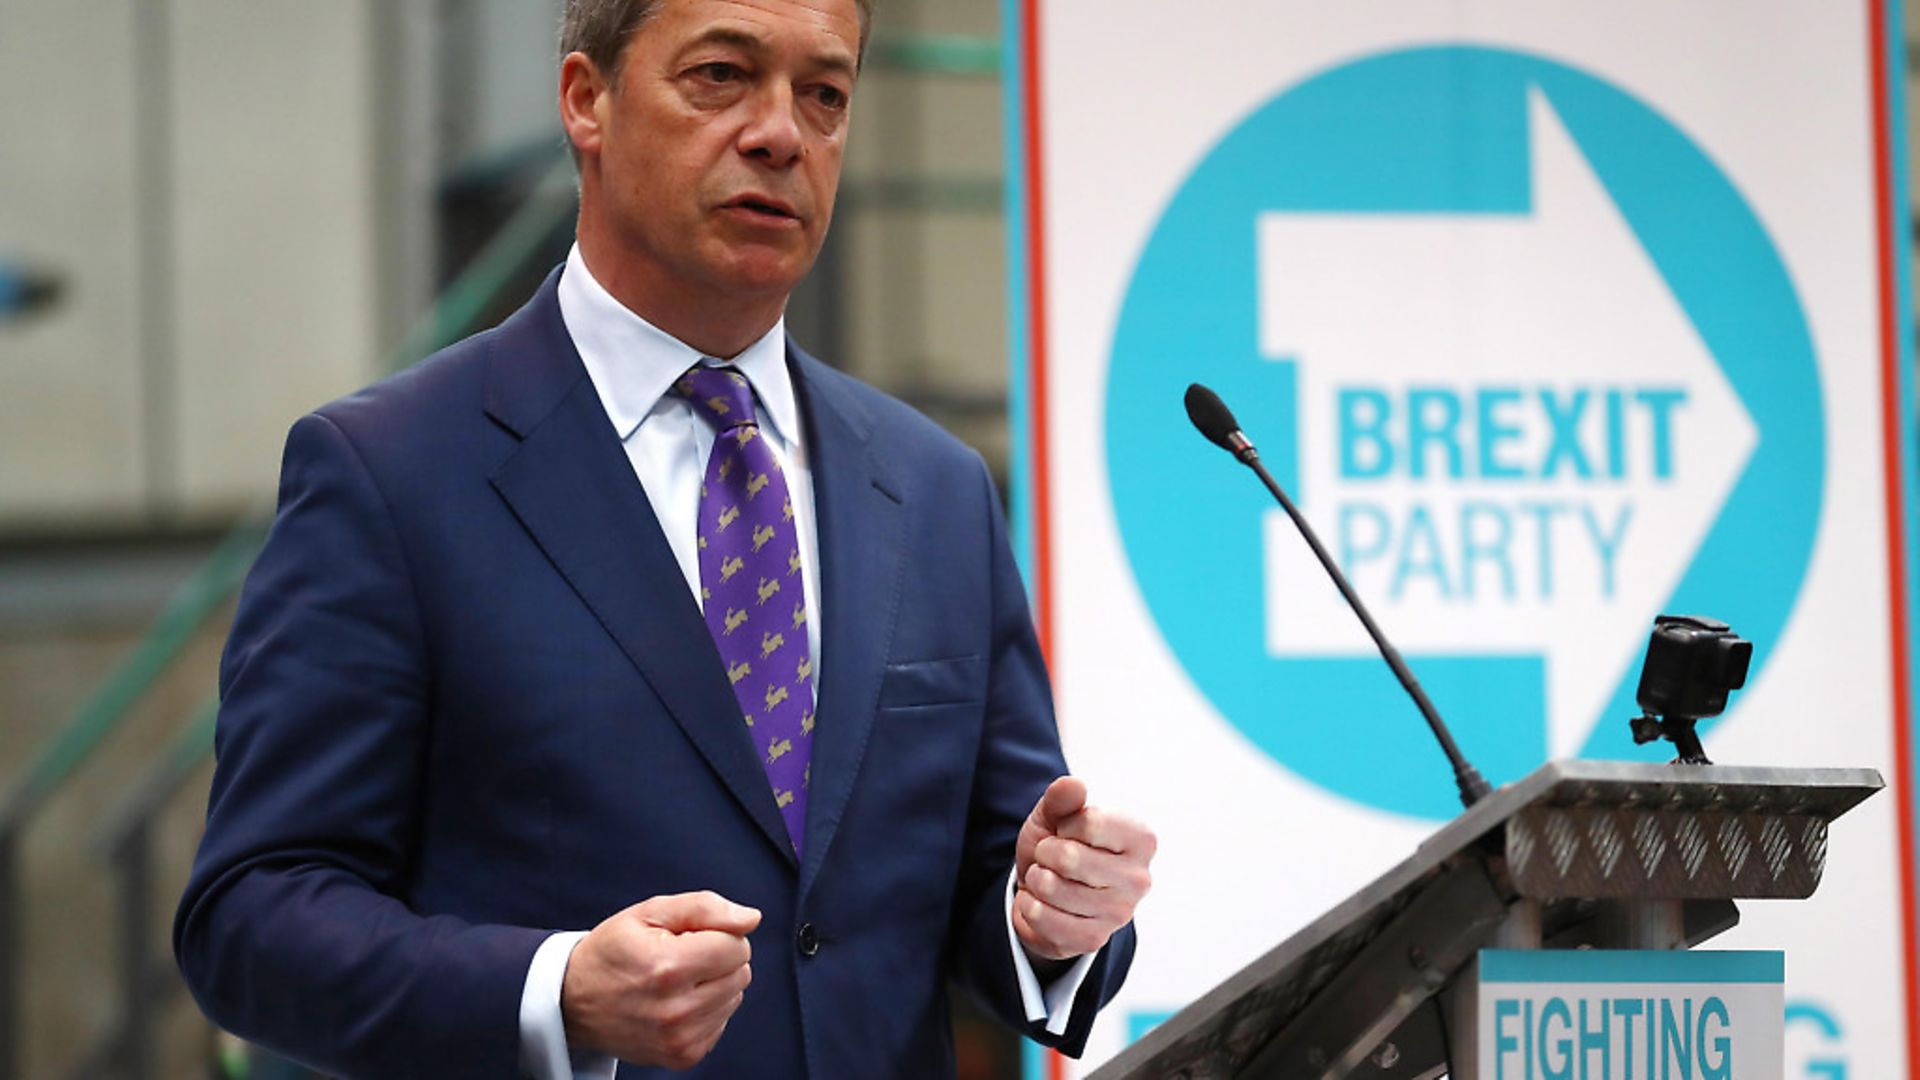 Nigel Farage speaks at the launch of the Brexit Party. (Photo by Matthew Lewis/Getty Images) - Credit: Getty Images